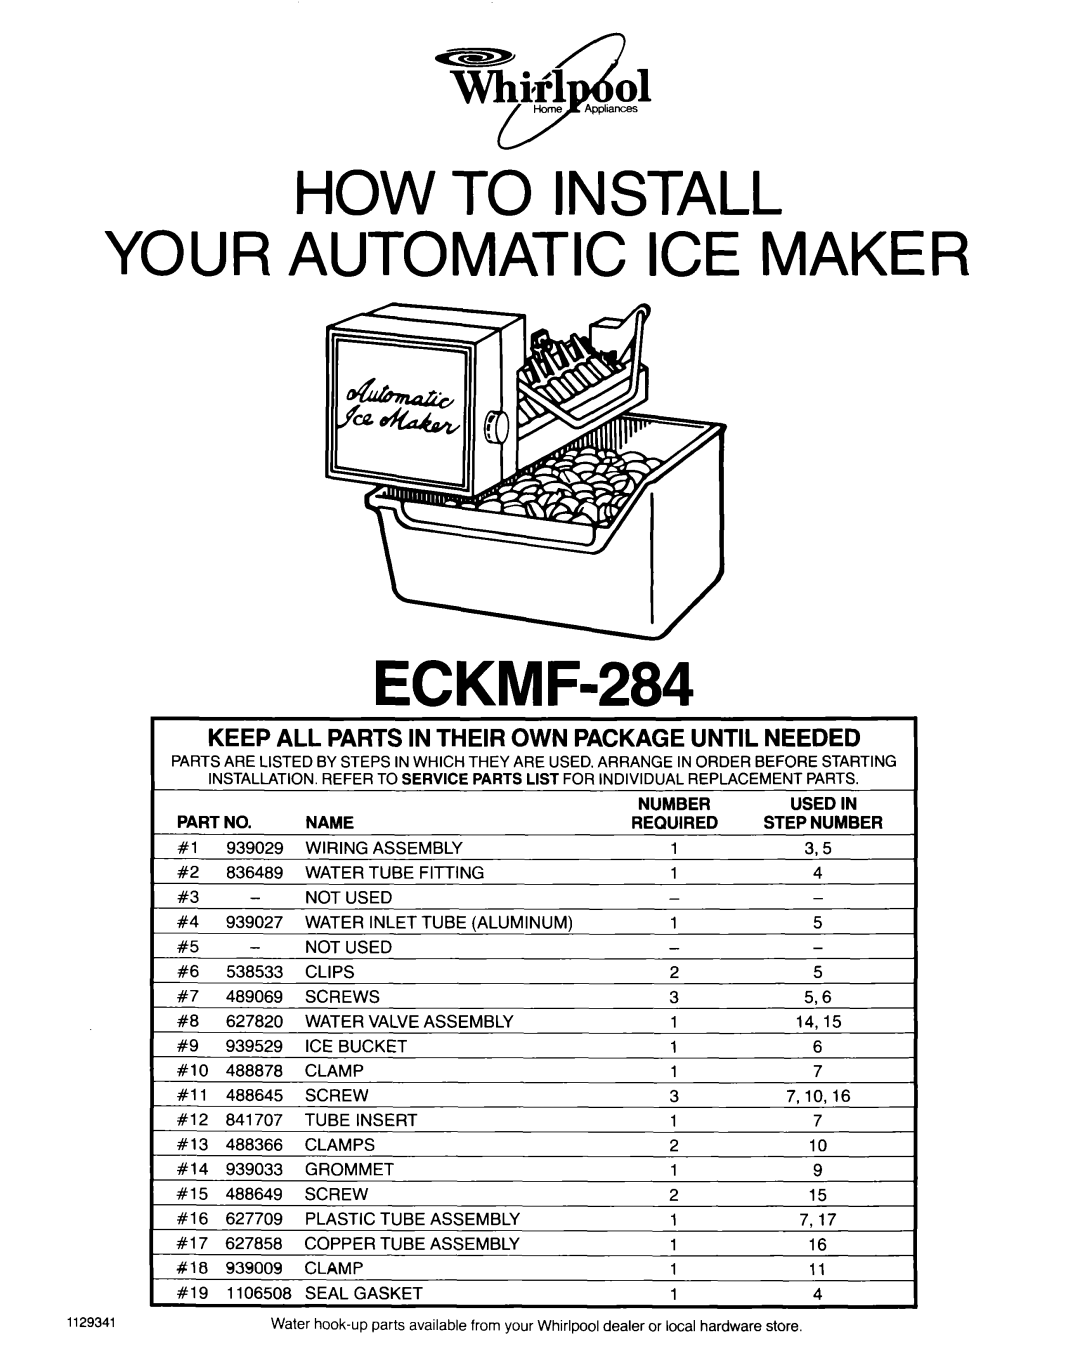 Whirlpool ECKMF-284 manual Keep All Parts In Their Own Package Until Needed 